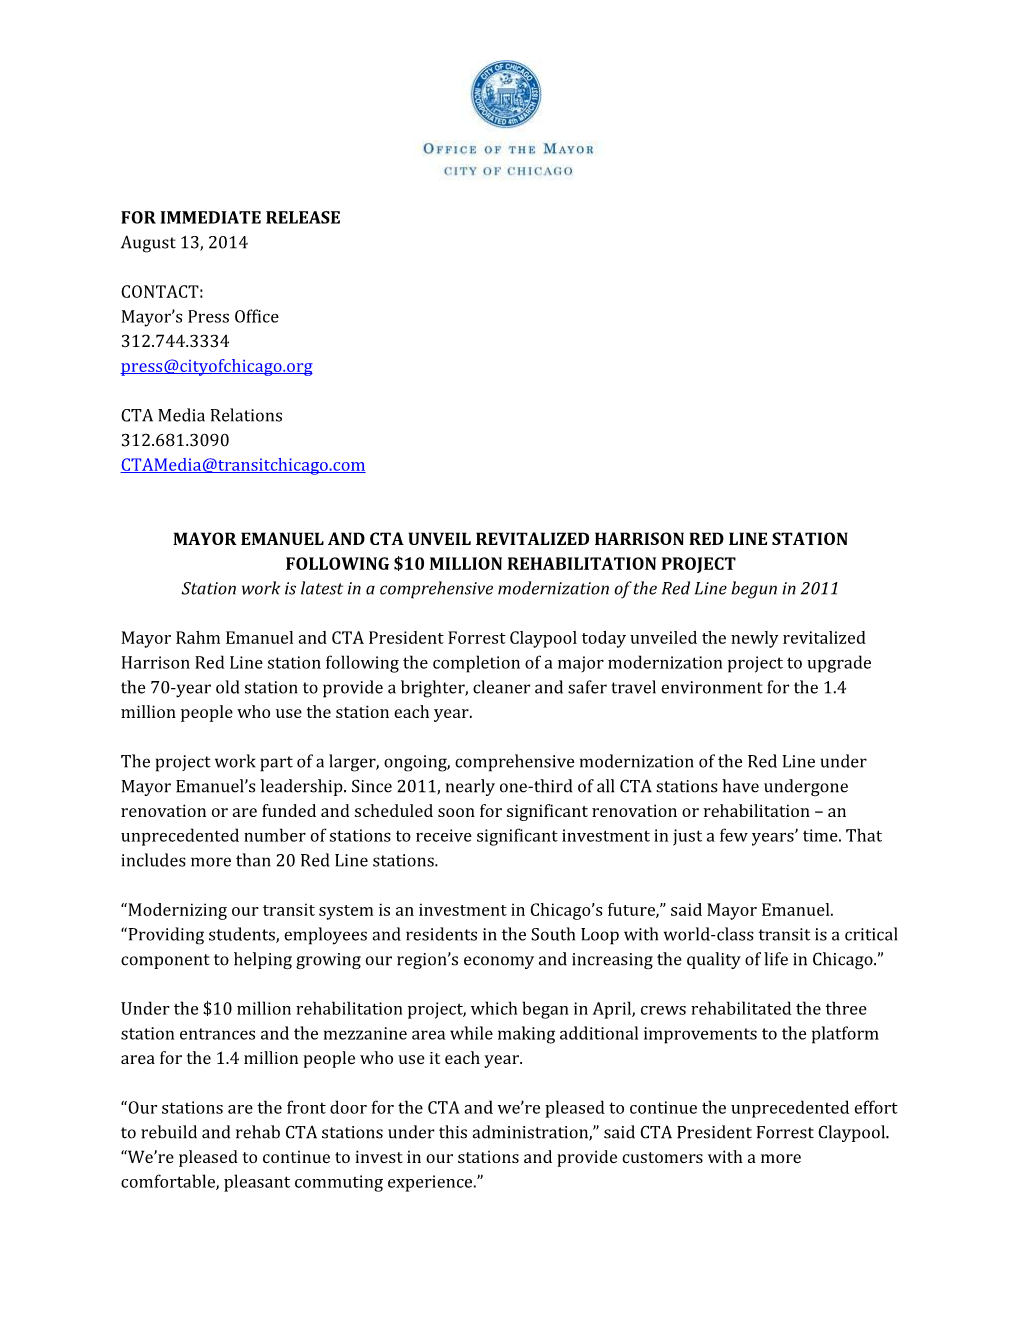 FOR IMMEDIATE RELEASE August 13, 2014 CONTACT: Mayor's Press